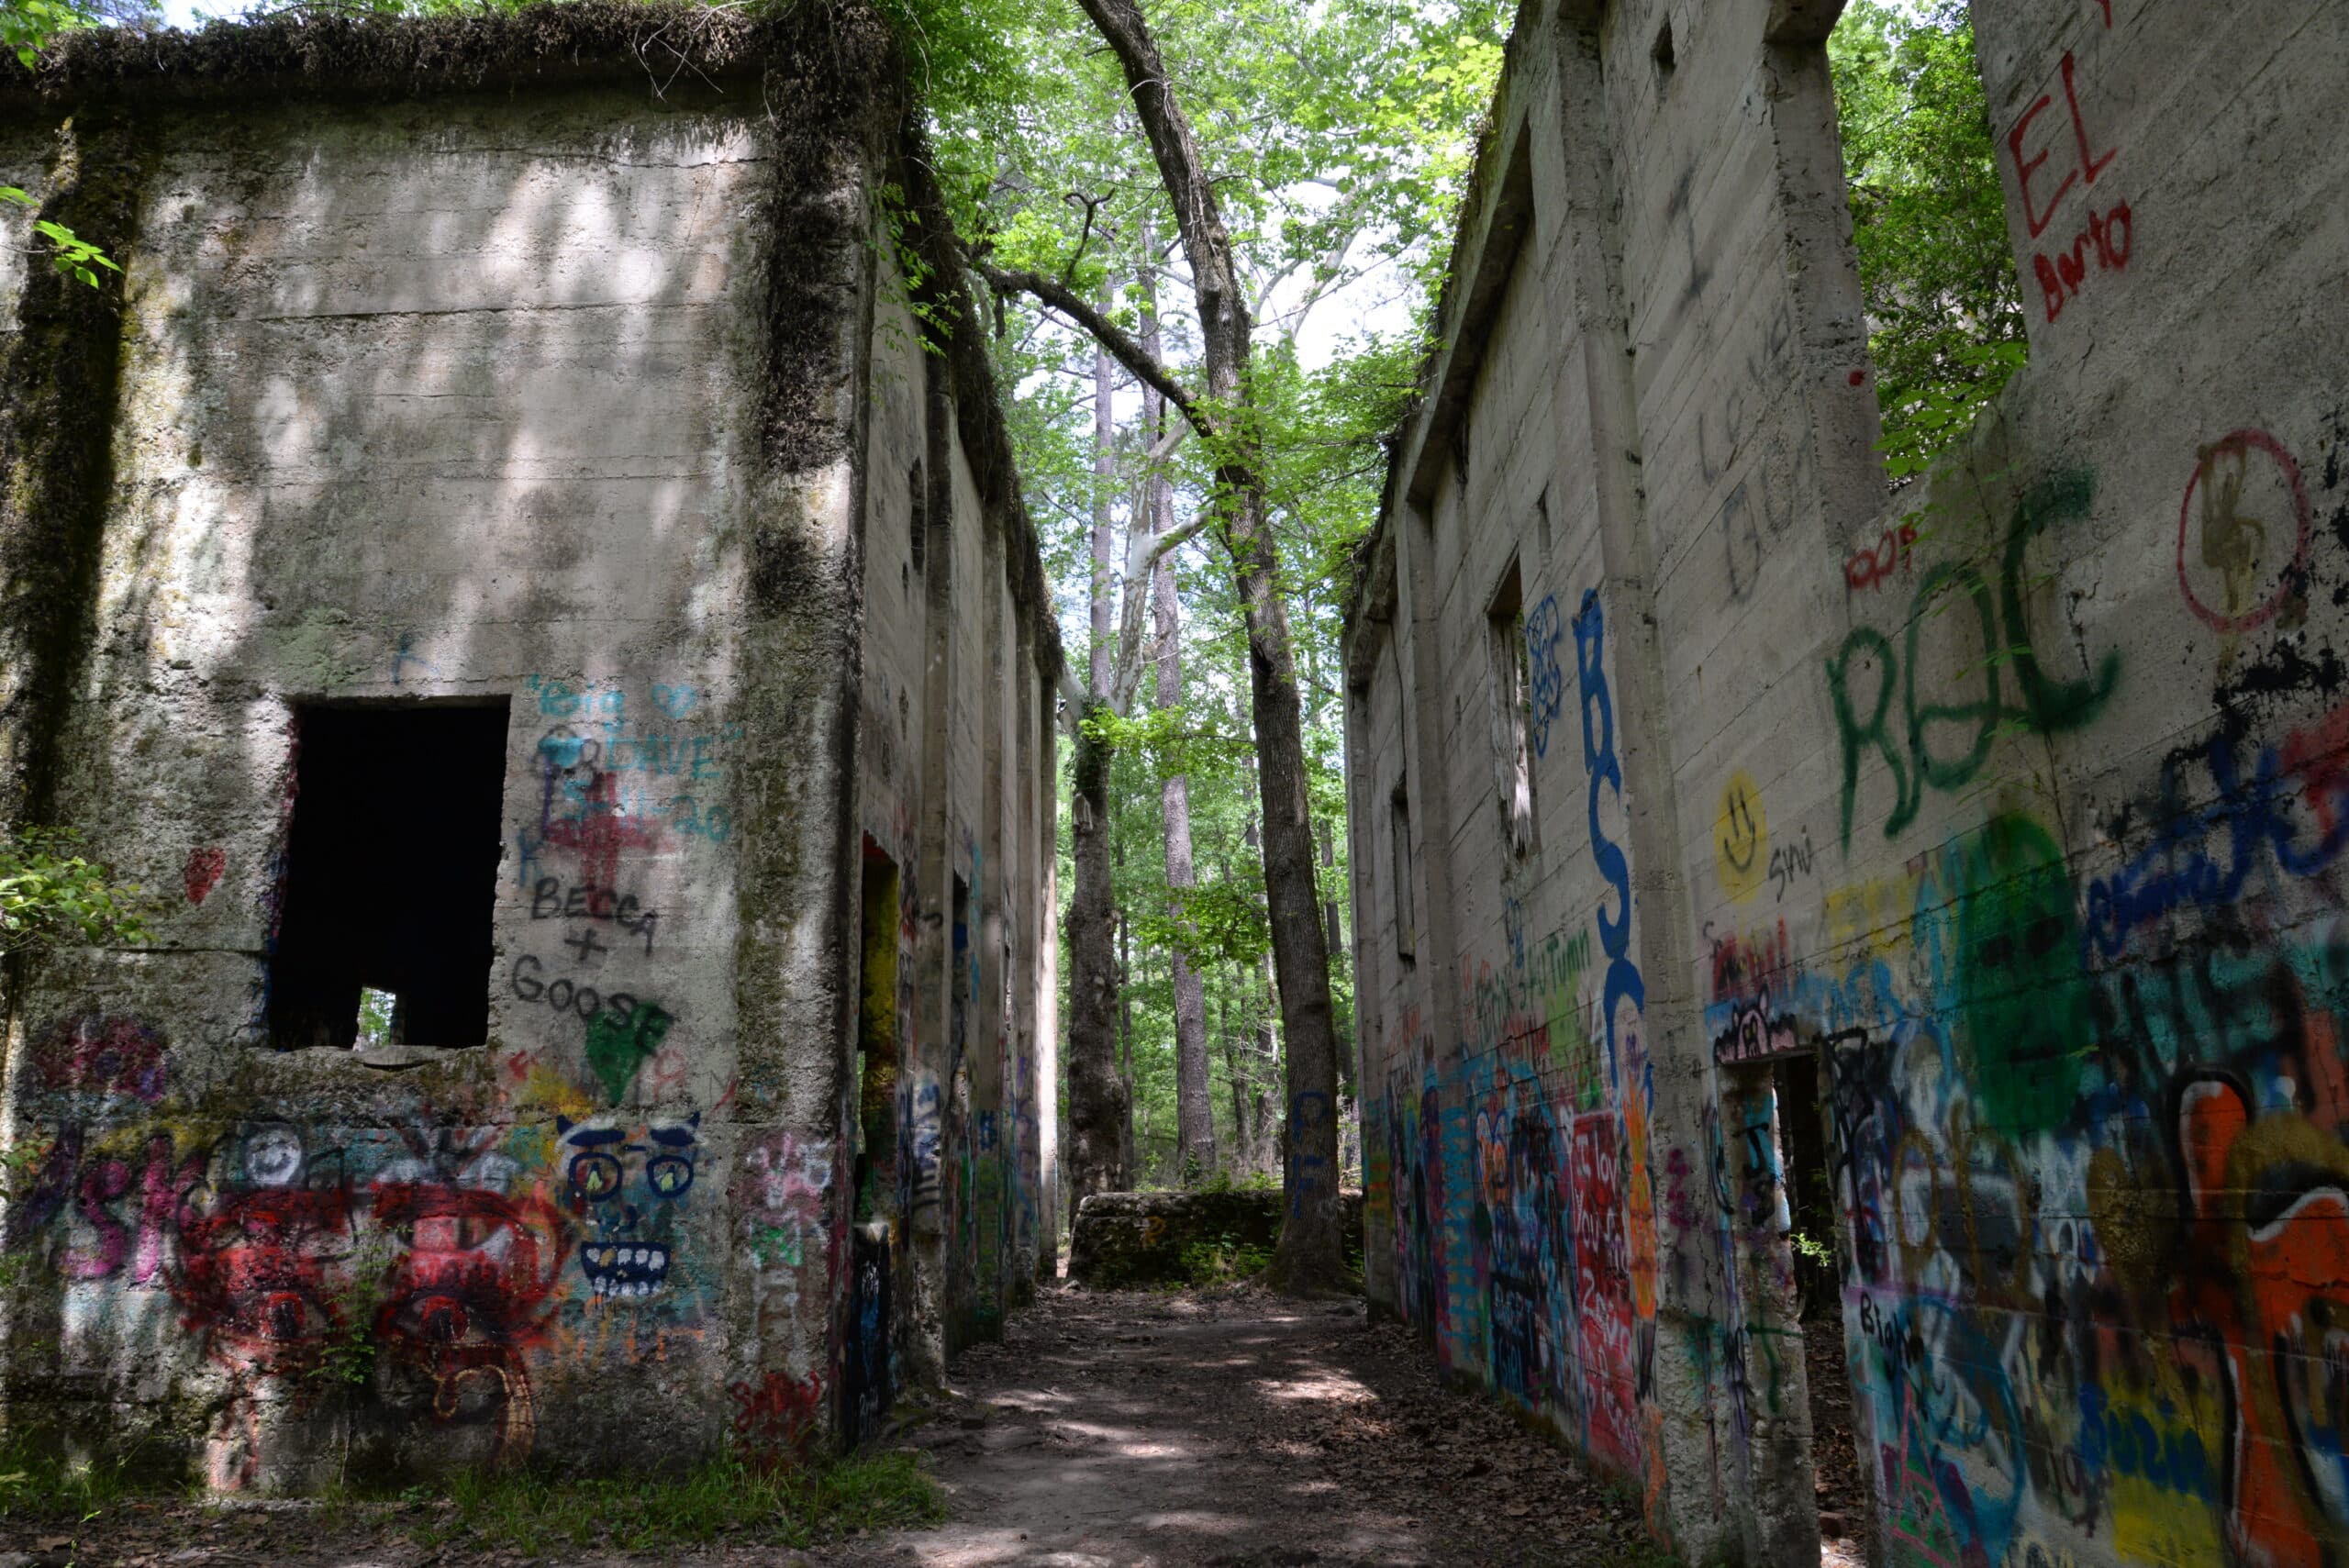 A photo of the sawmill. It is split into two buildings-- one on the left of the image, one on the right. Both buildings are covered in colorful graffiti. Between them, trees can be seen.